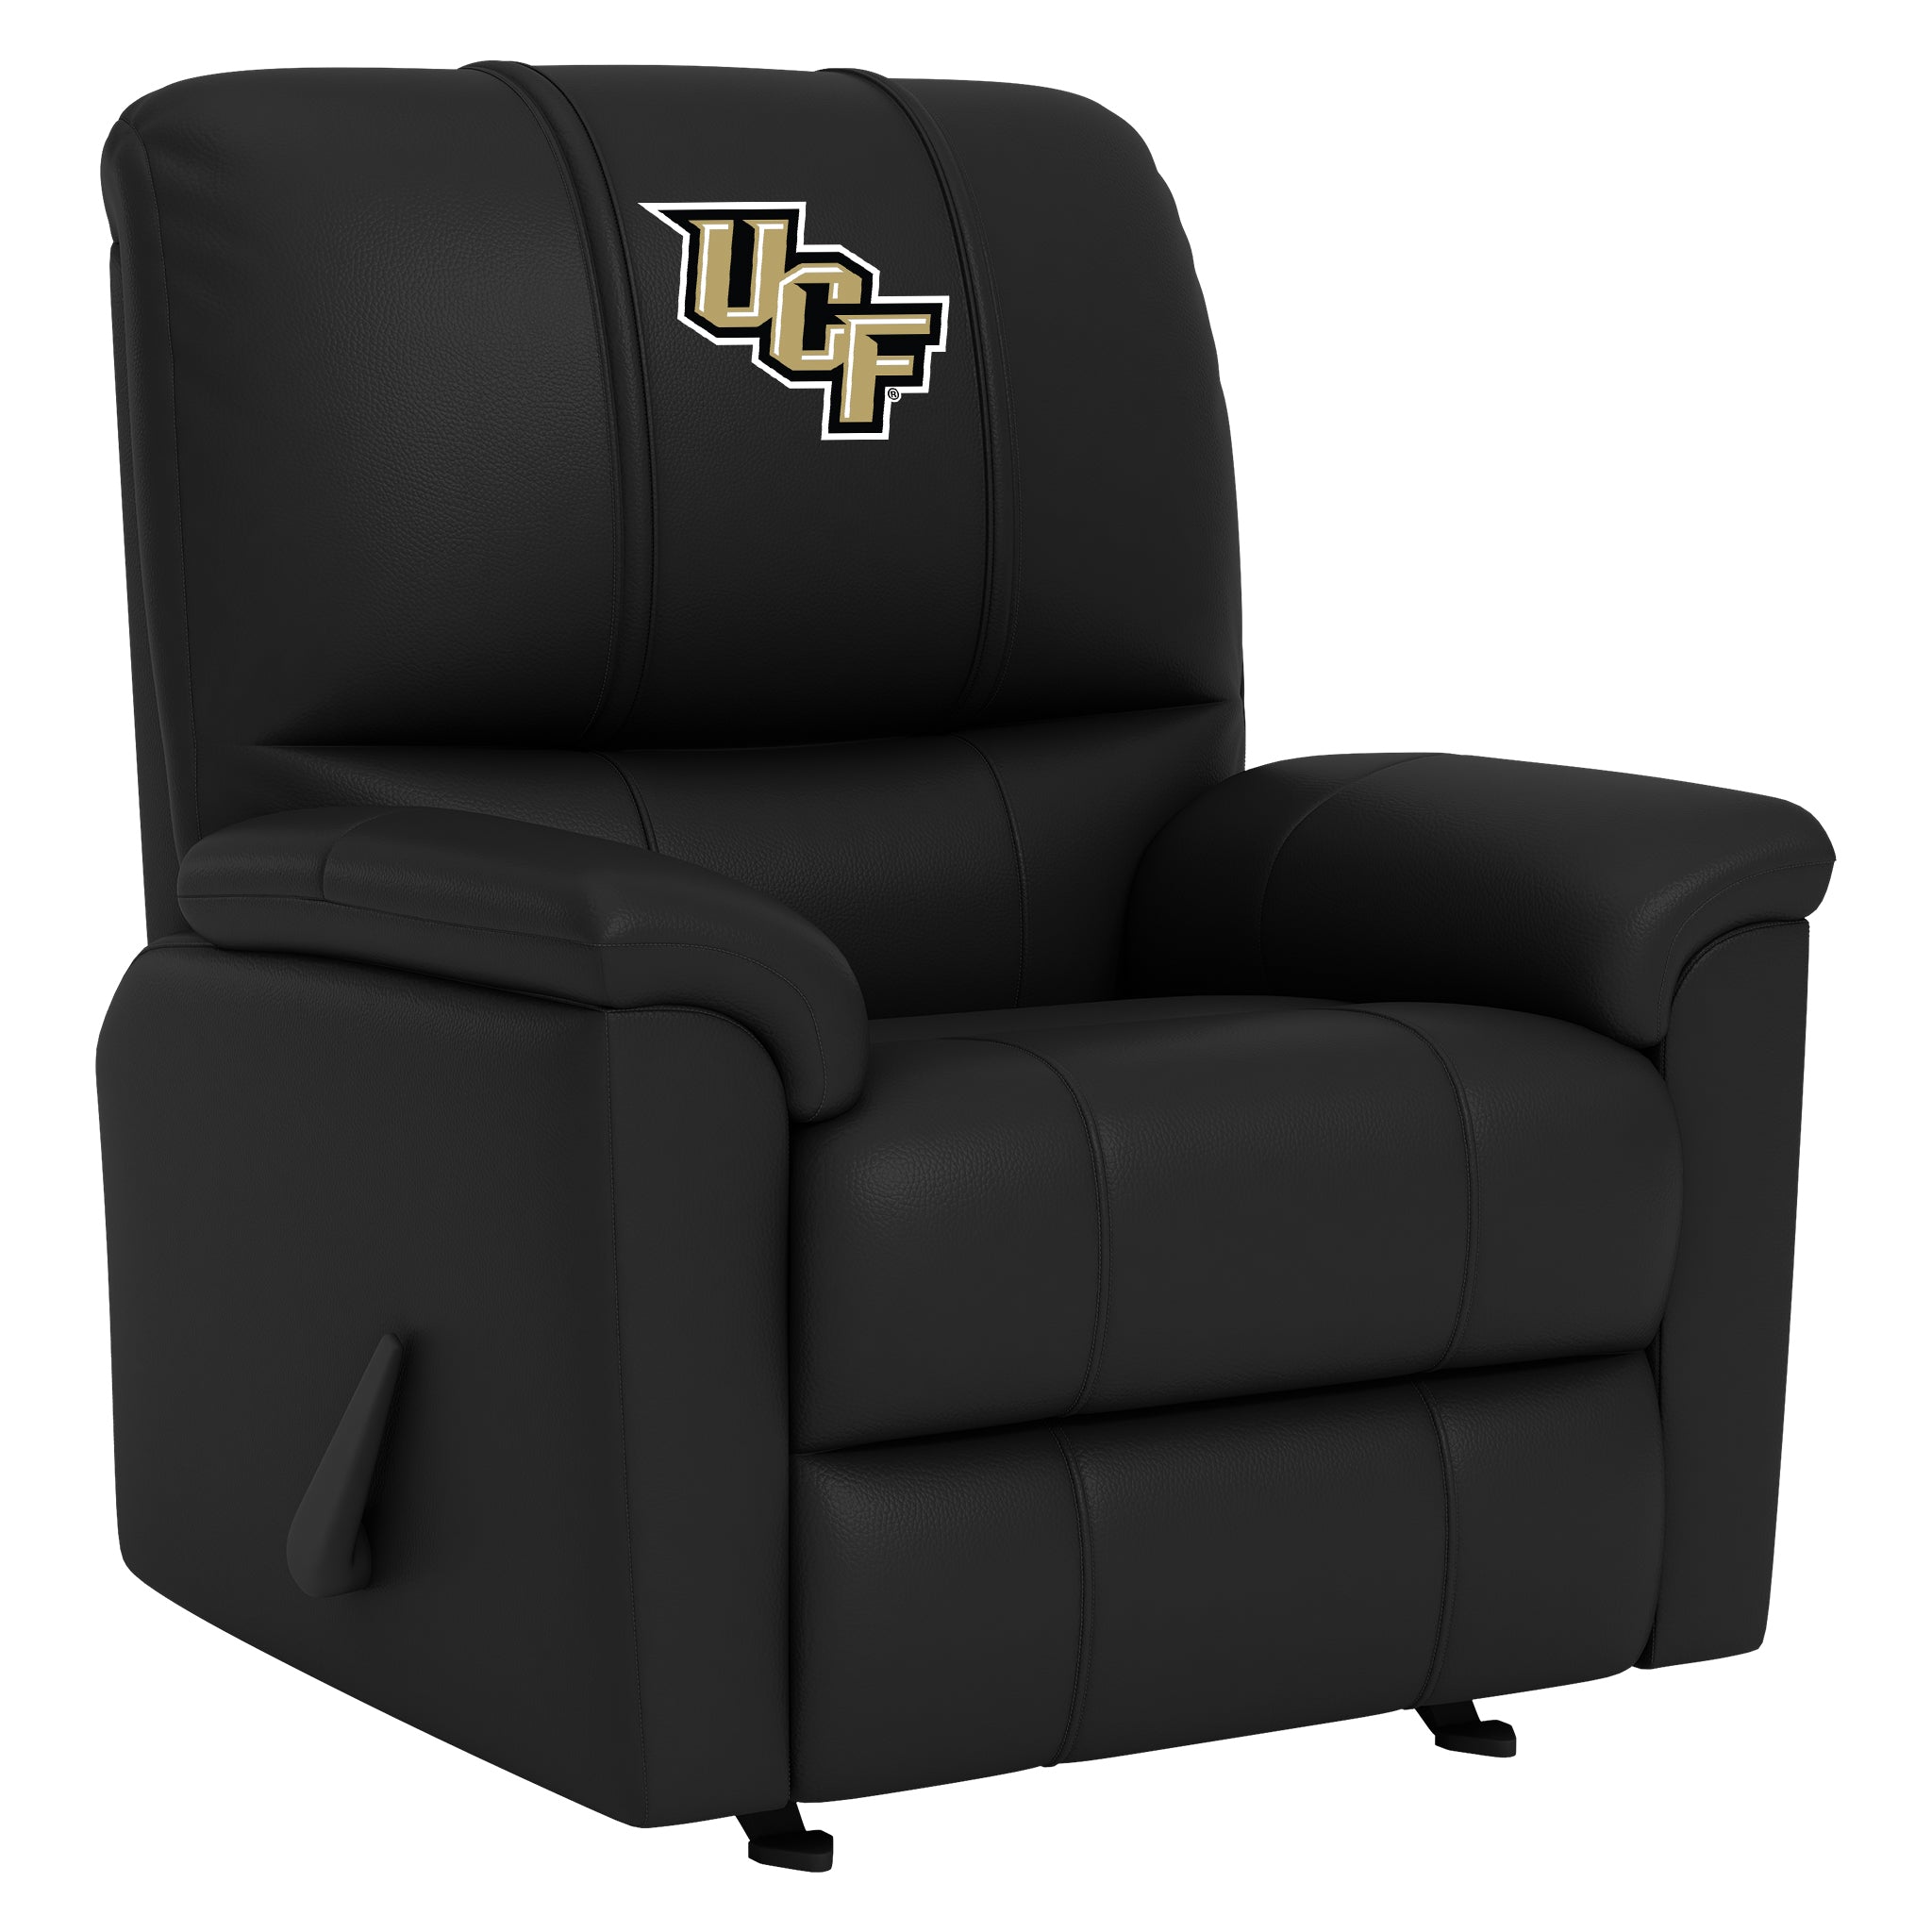 UCF Silver Club Chair with Central Florida UCF Logo